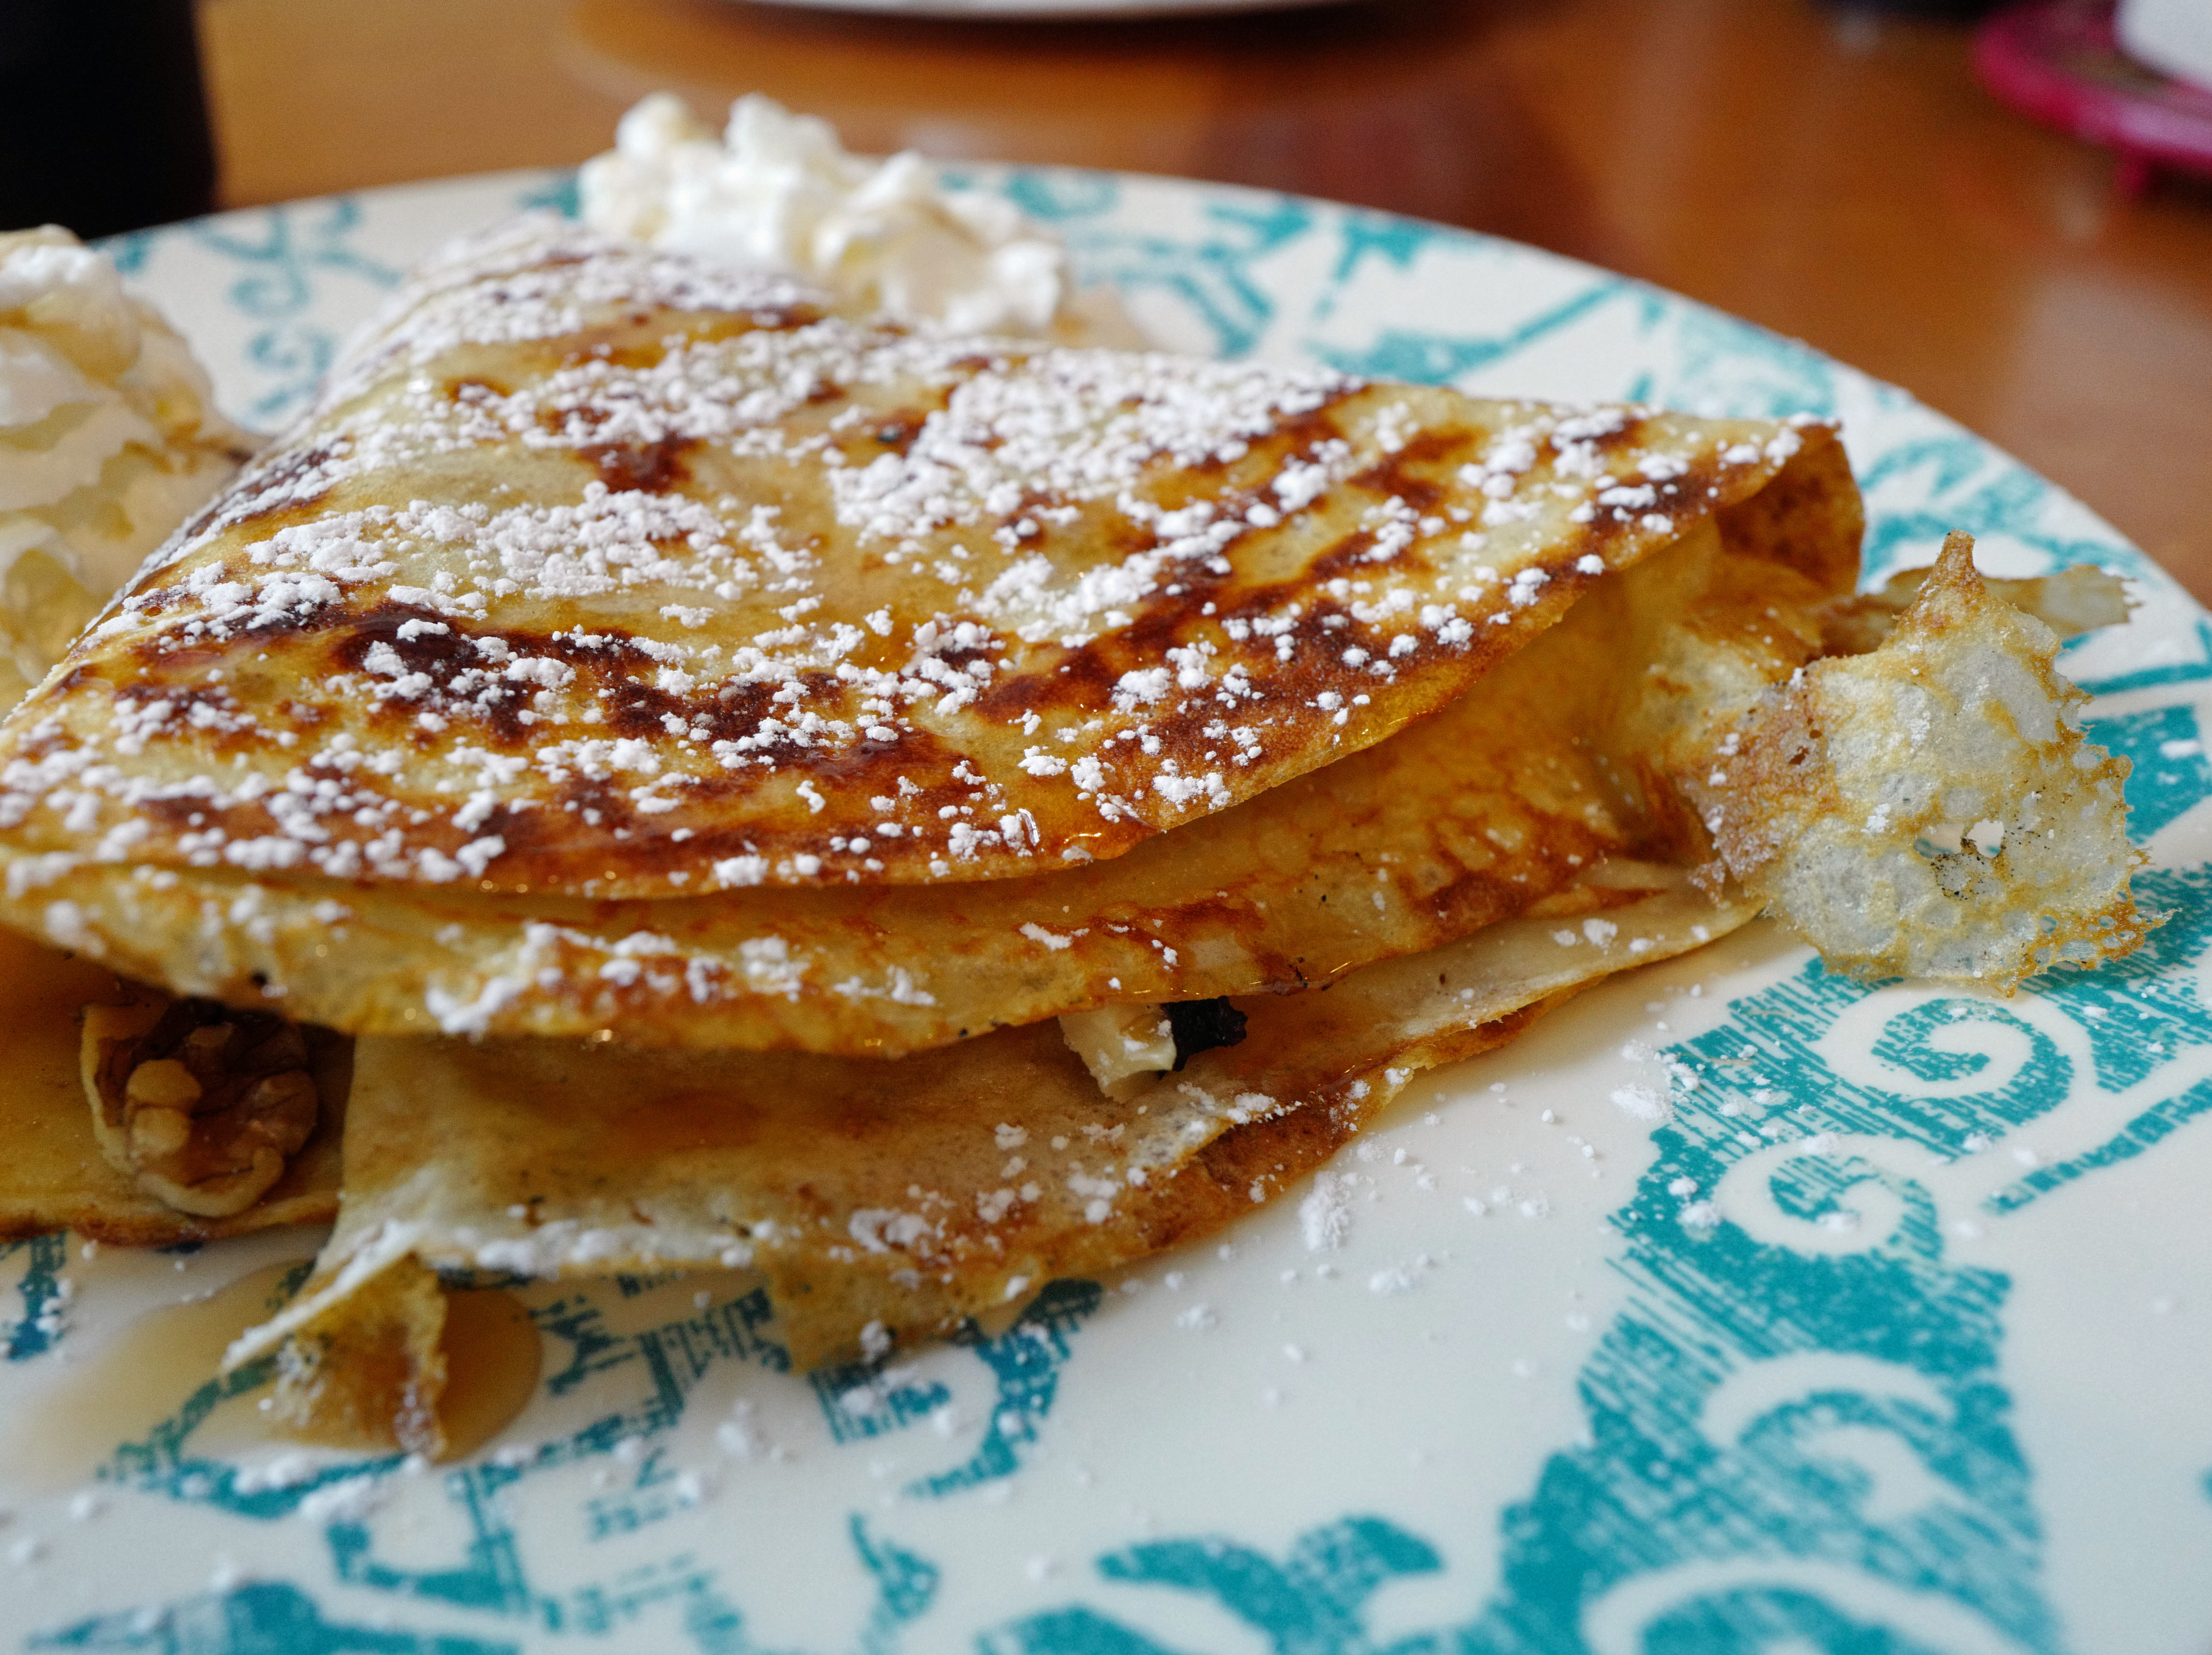 Paper-thin crepes, dusted with powdered sugar, envelop bananas, walnuts, maple syrup and brown sugar